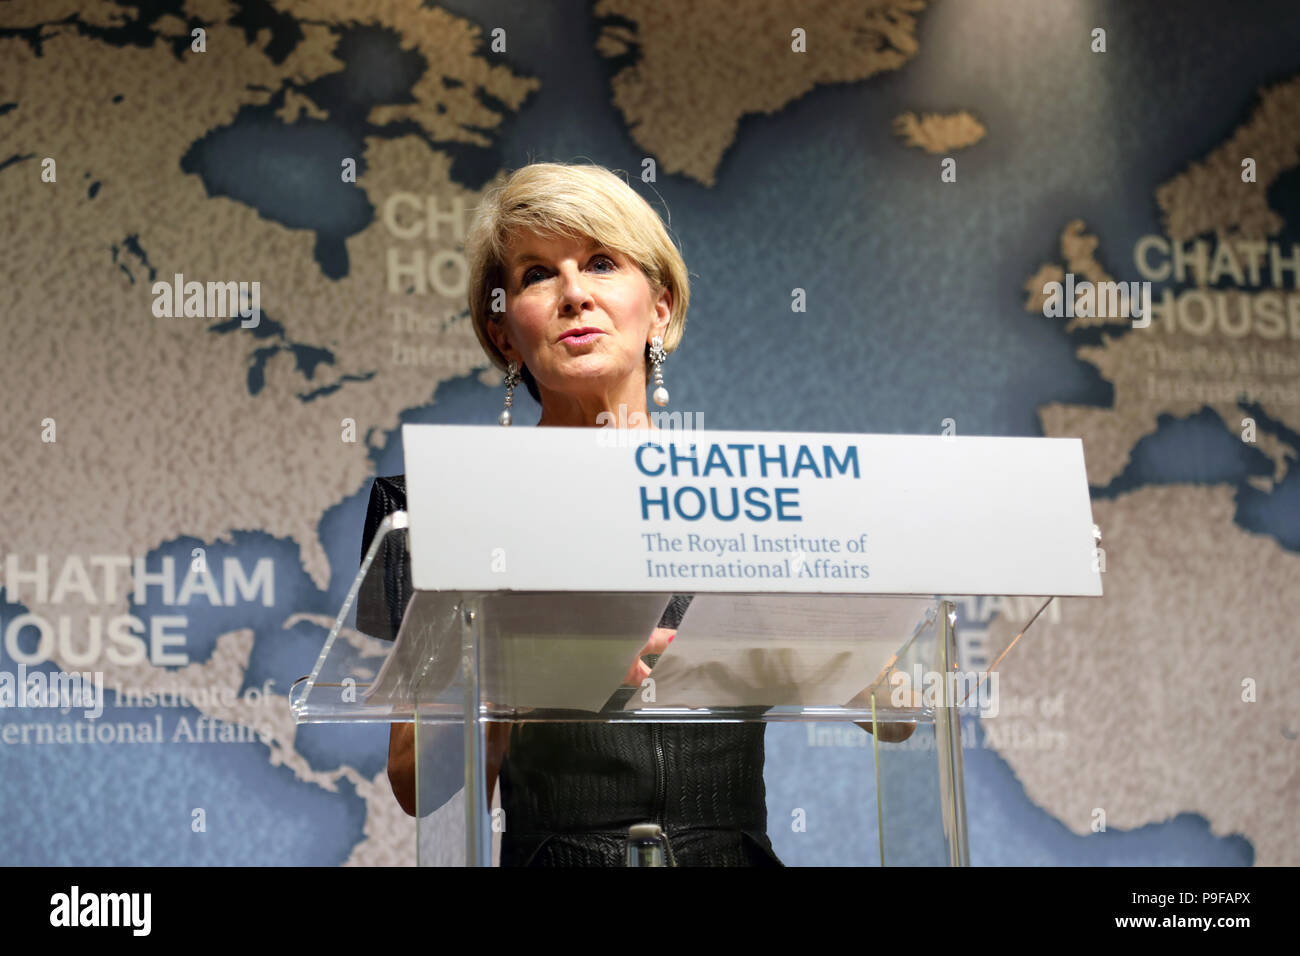 London / UK - July 18 2018: Julie Bishop, Australian minister for foreign affairs, speaking at the Chatham House think-tank in central London. Credit: Dominic Dudley/Alamy Live News Stock Photo